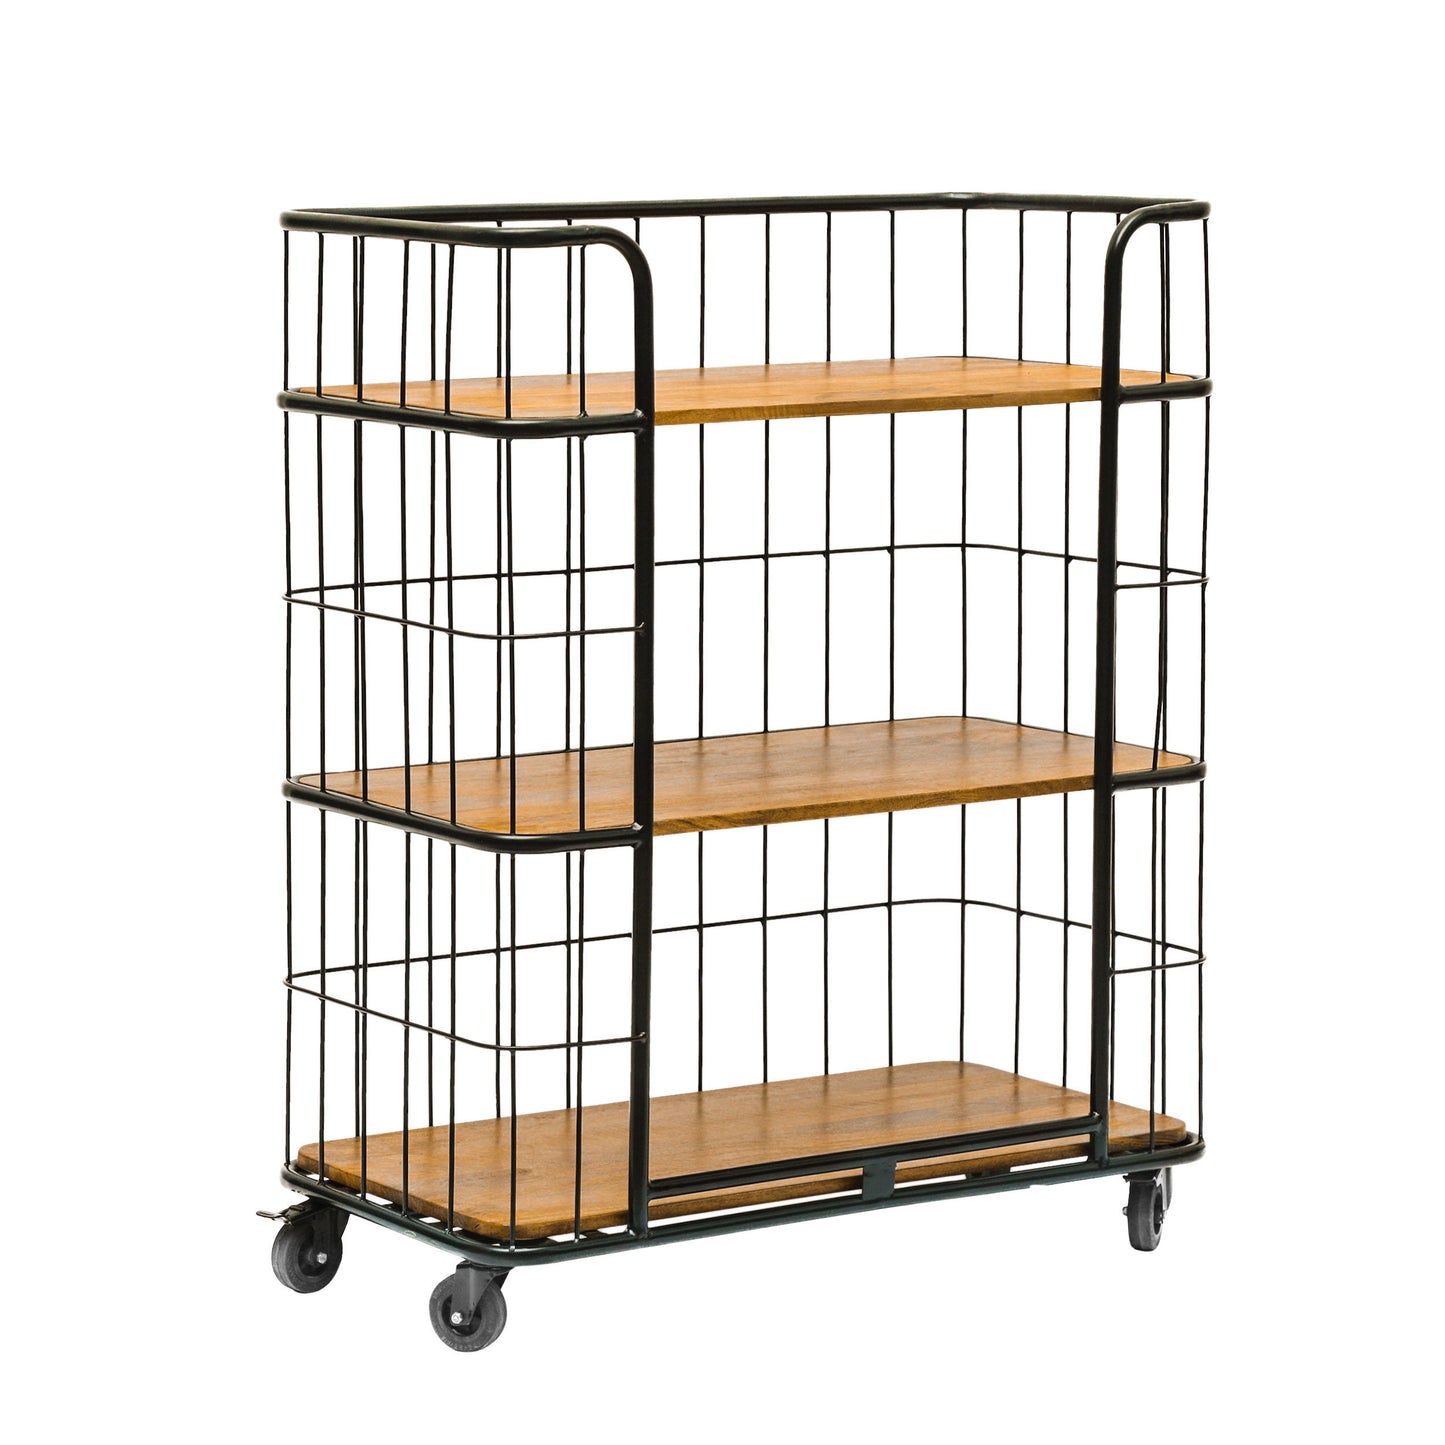 Baddow Modern Industrial Handcrafted Mango Wood Kitchen Cart with Wheels, Natural and Black